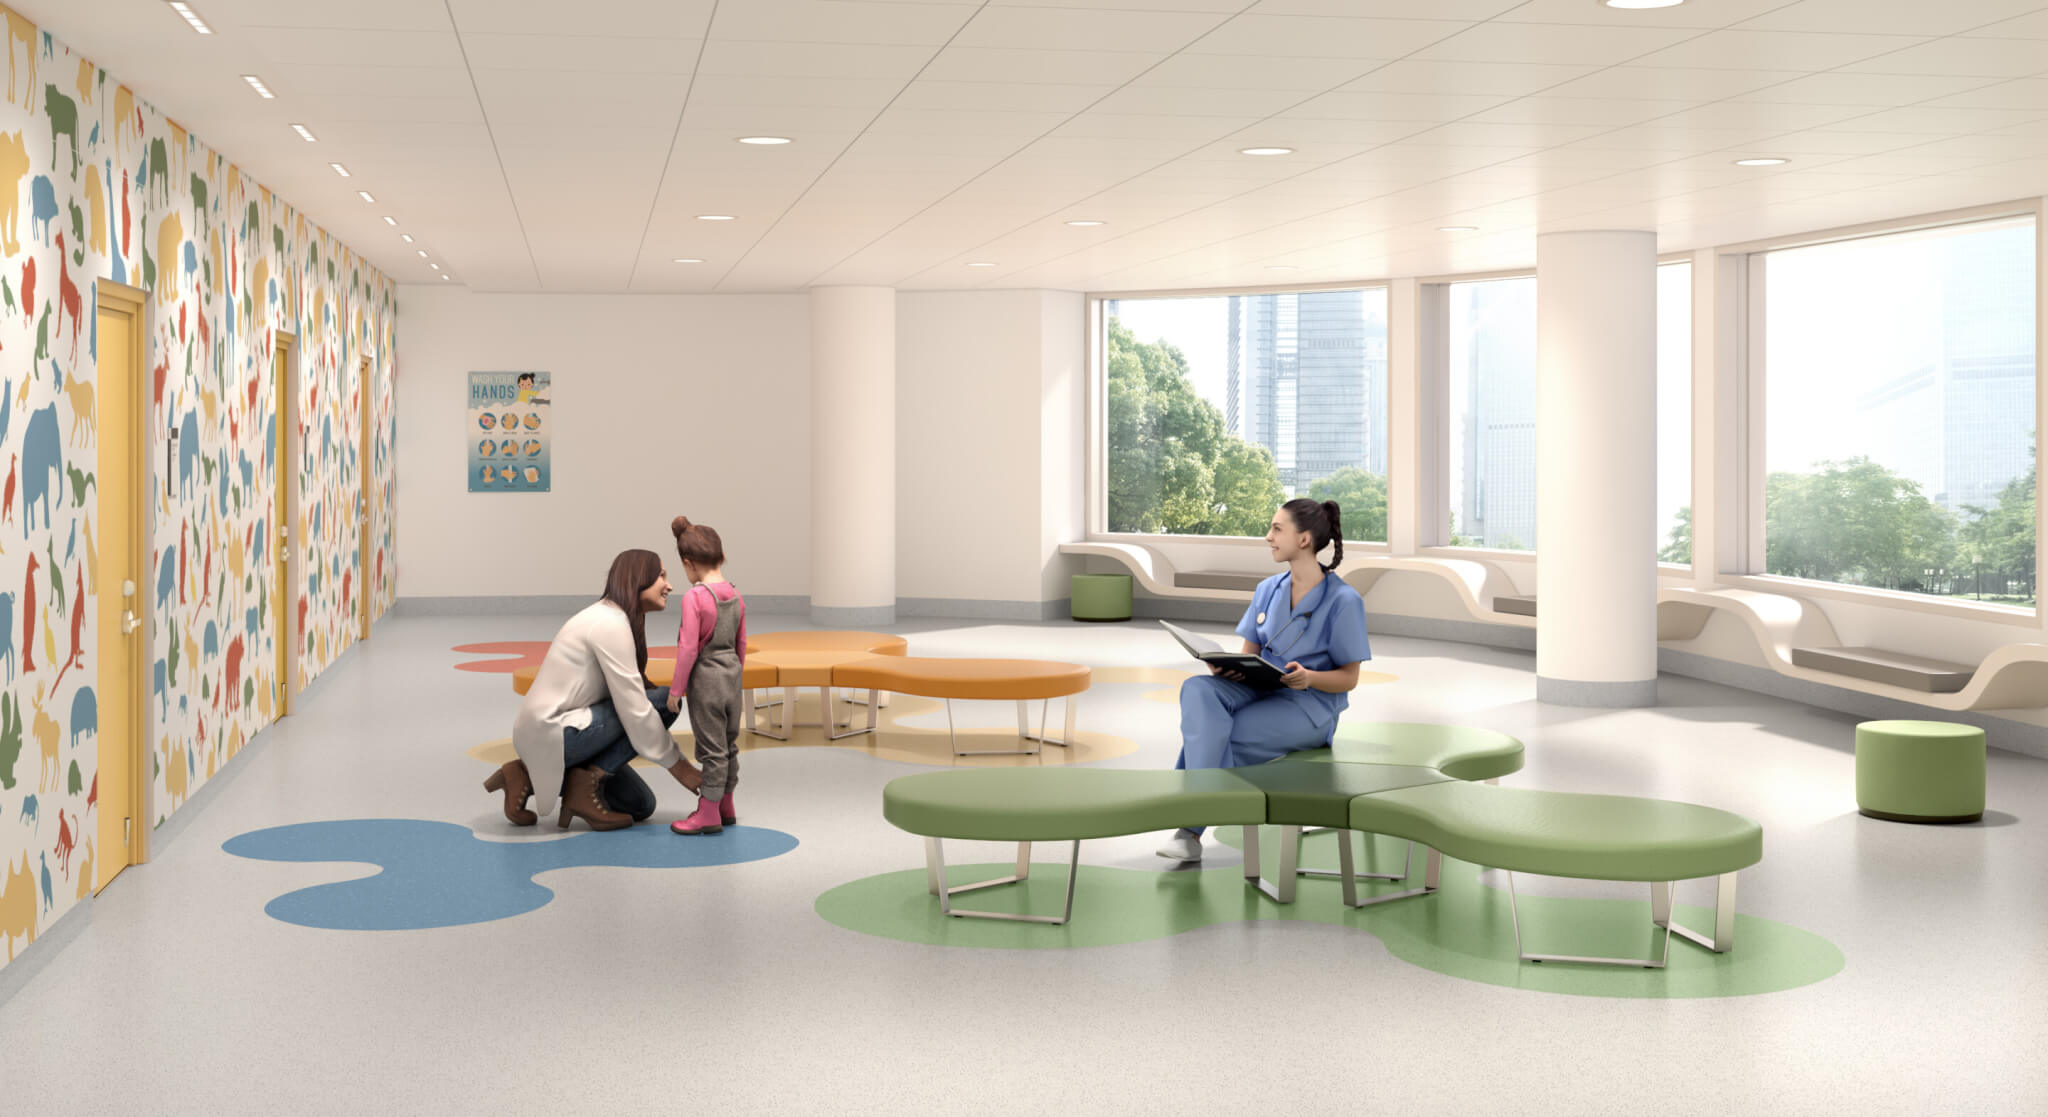 A healthcare facility with bright, abstract colors on the floor